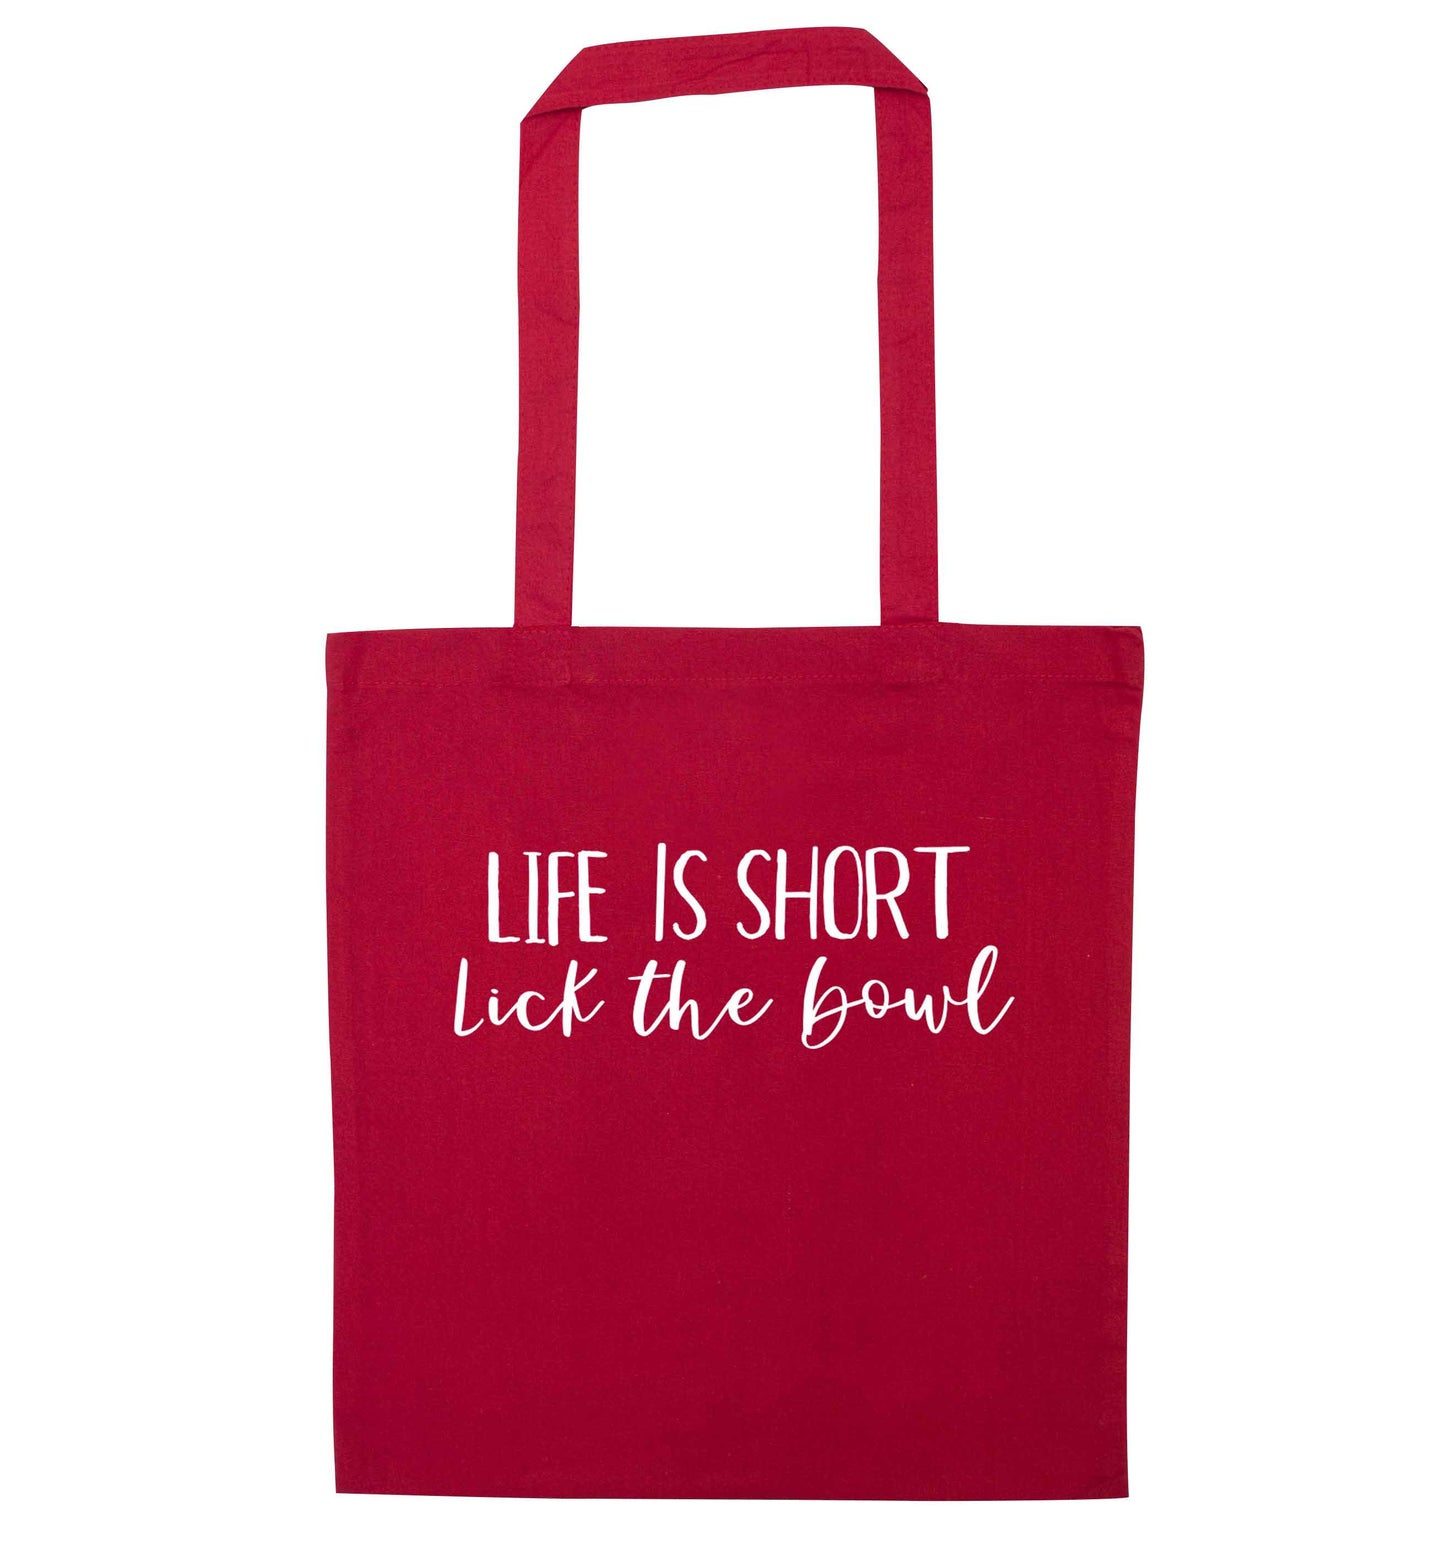 Life is short lick the bowl red tote bag